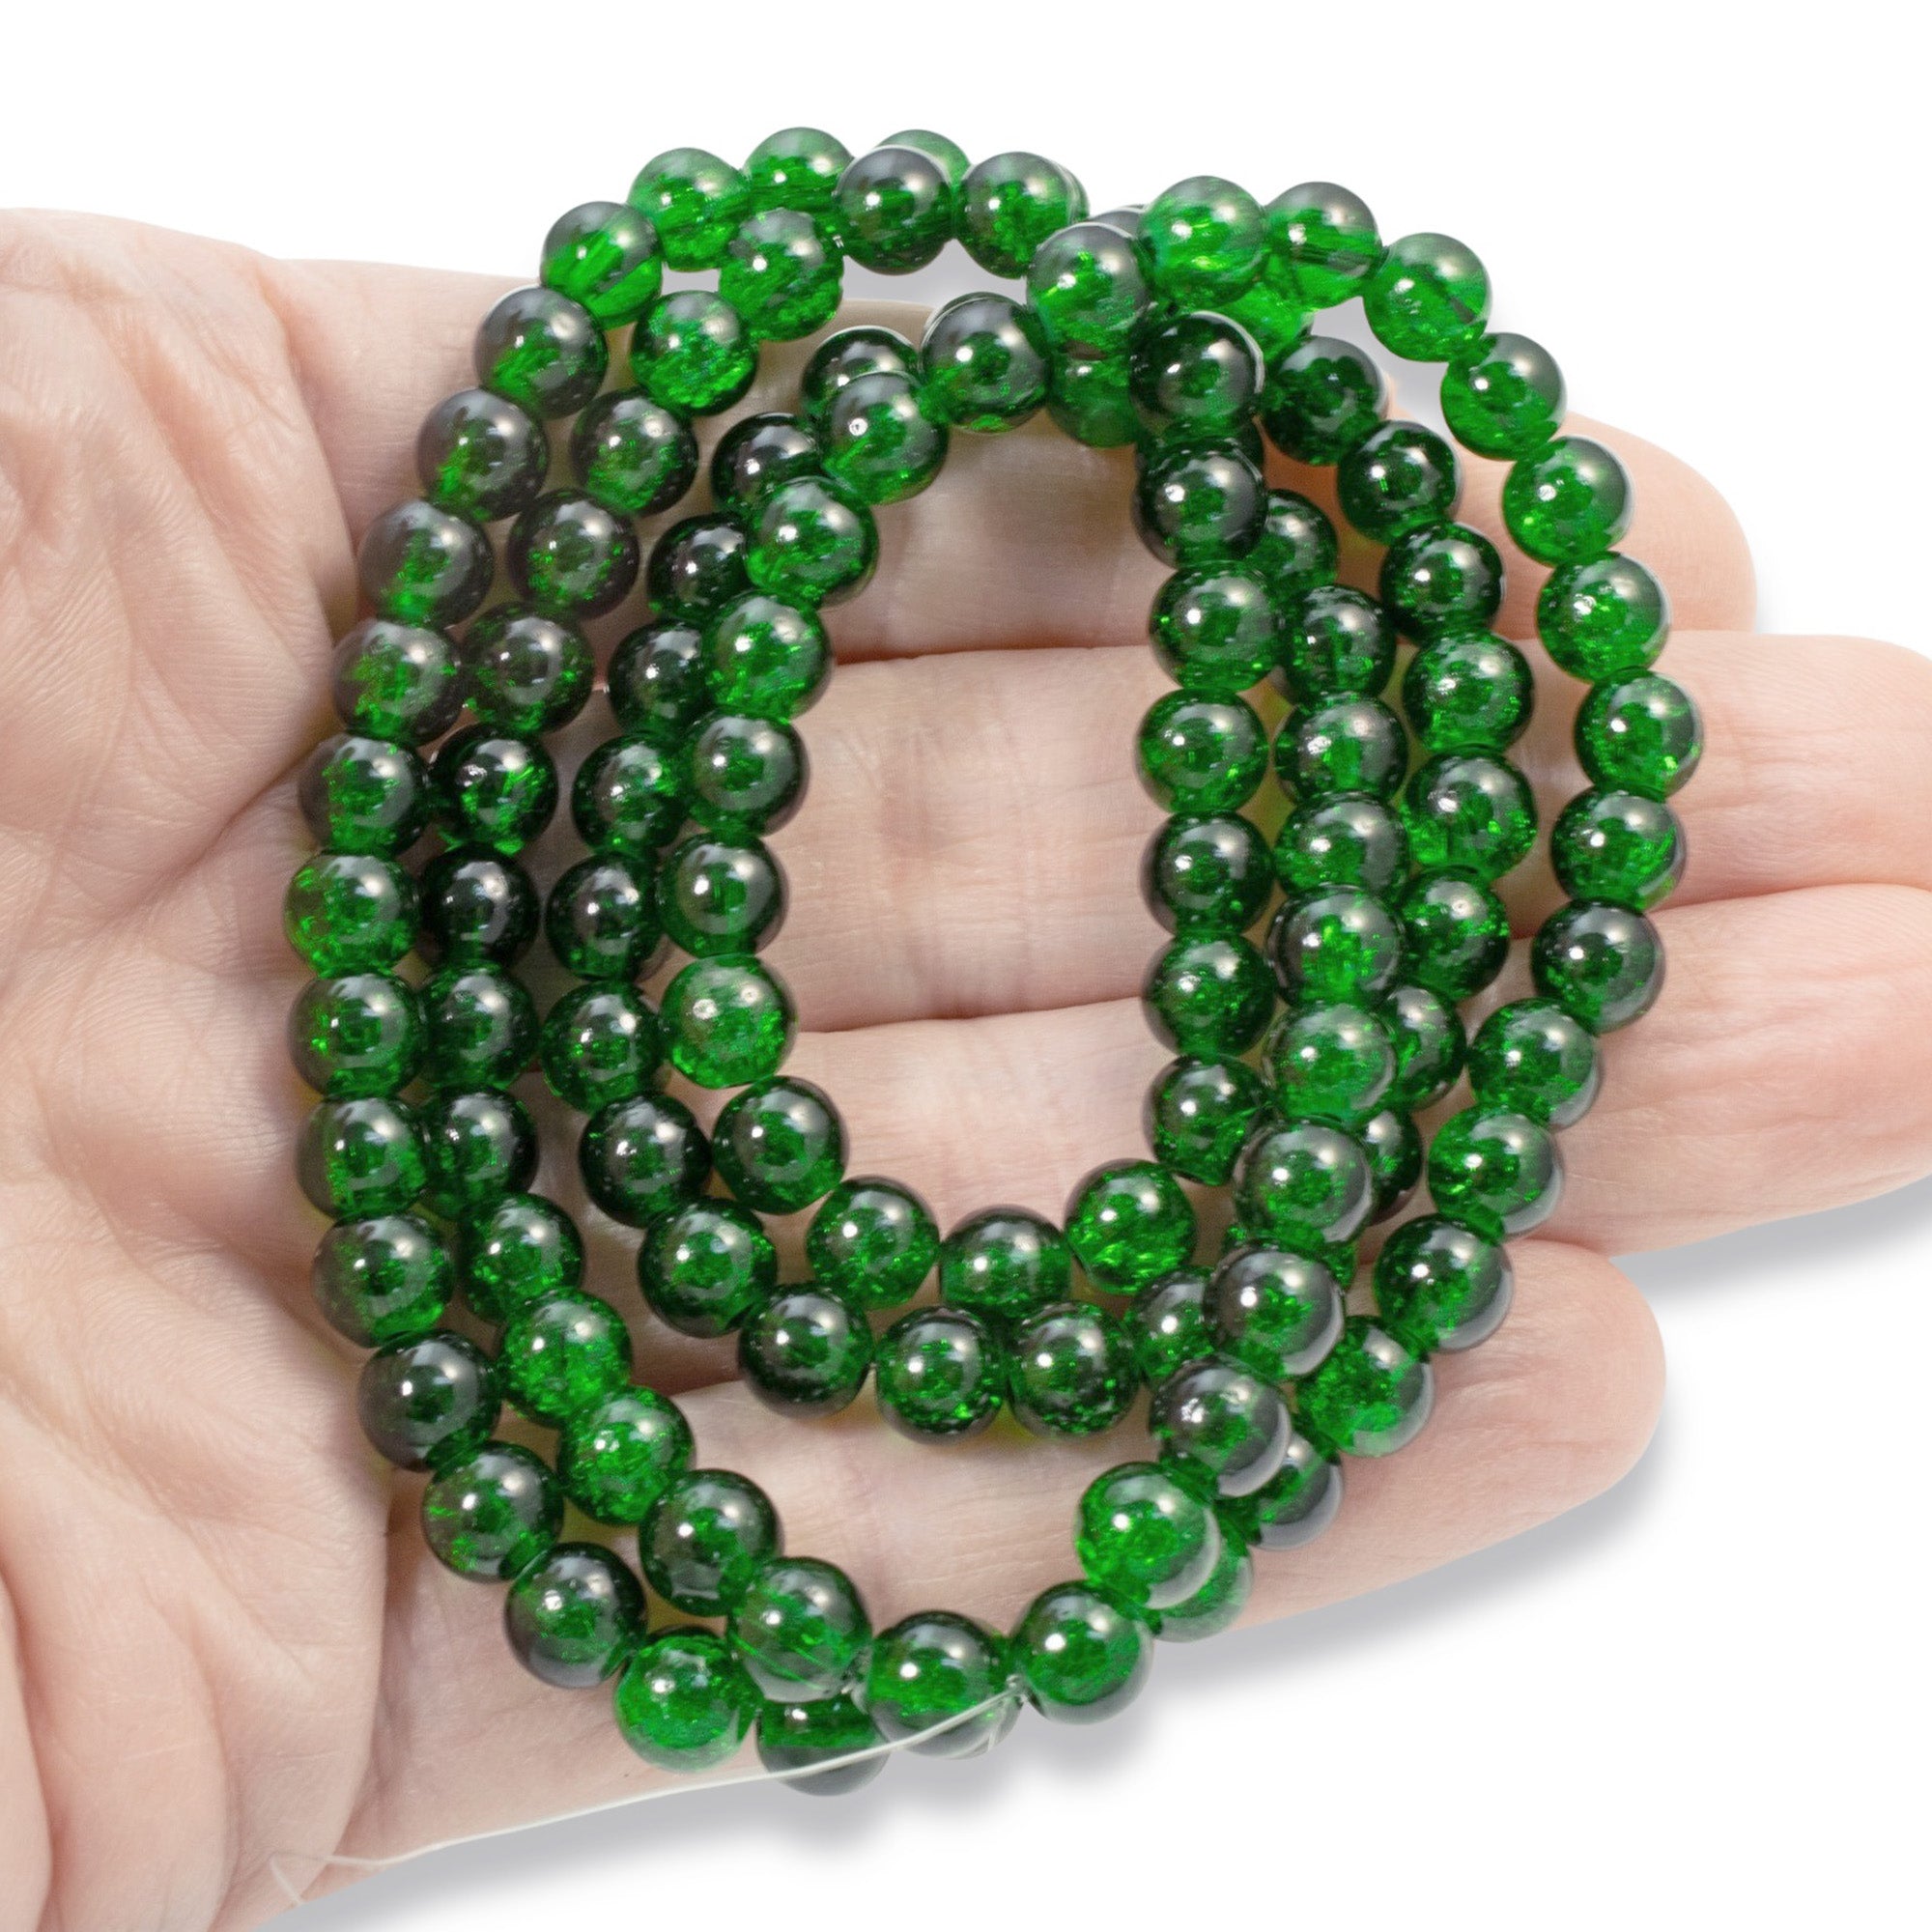 Bright Green 10mm Round Glass Crackle Beads | Hackberry Creek